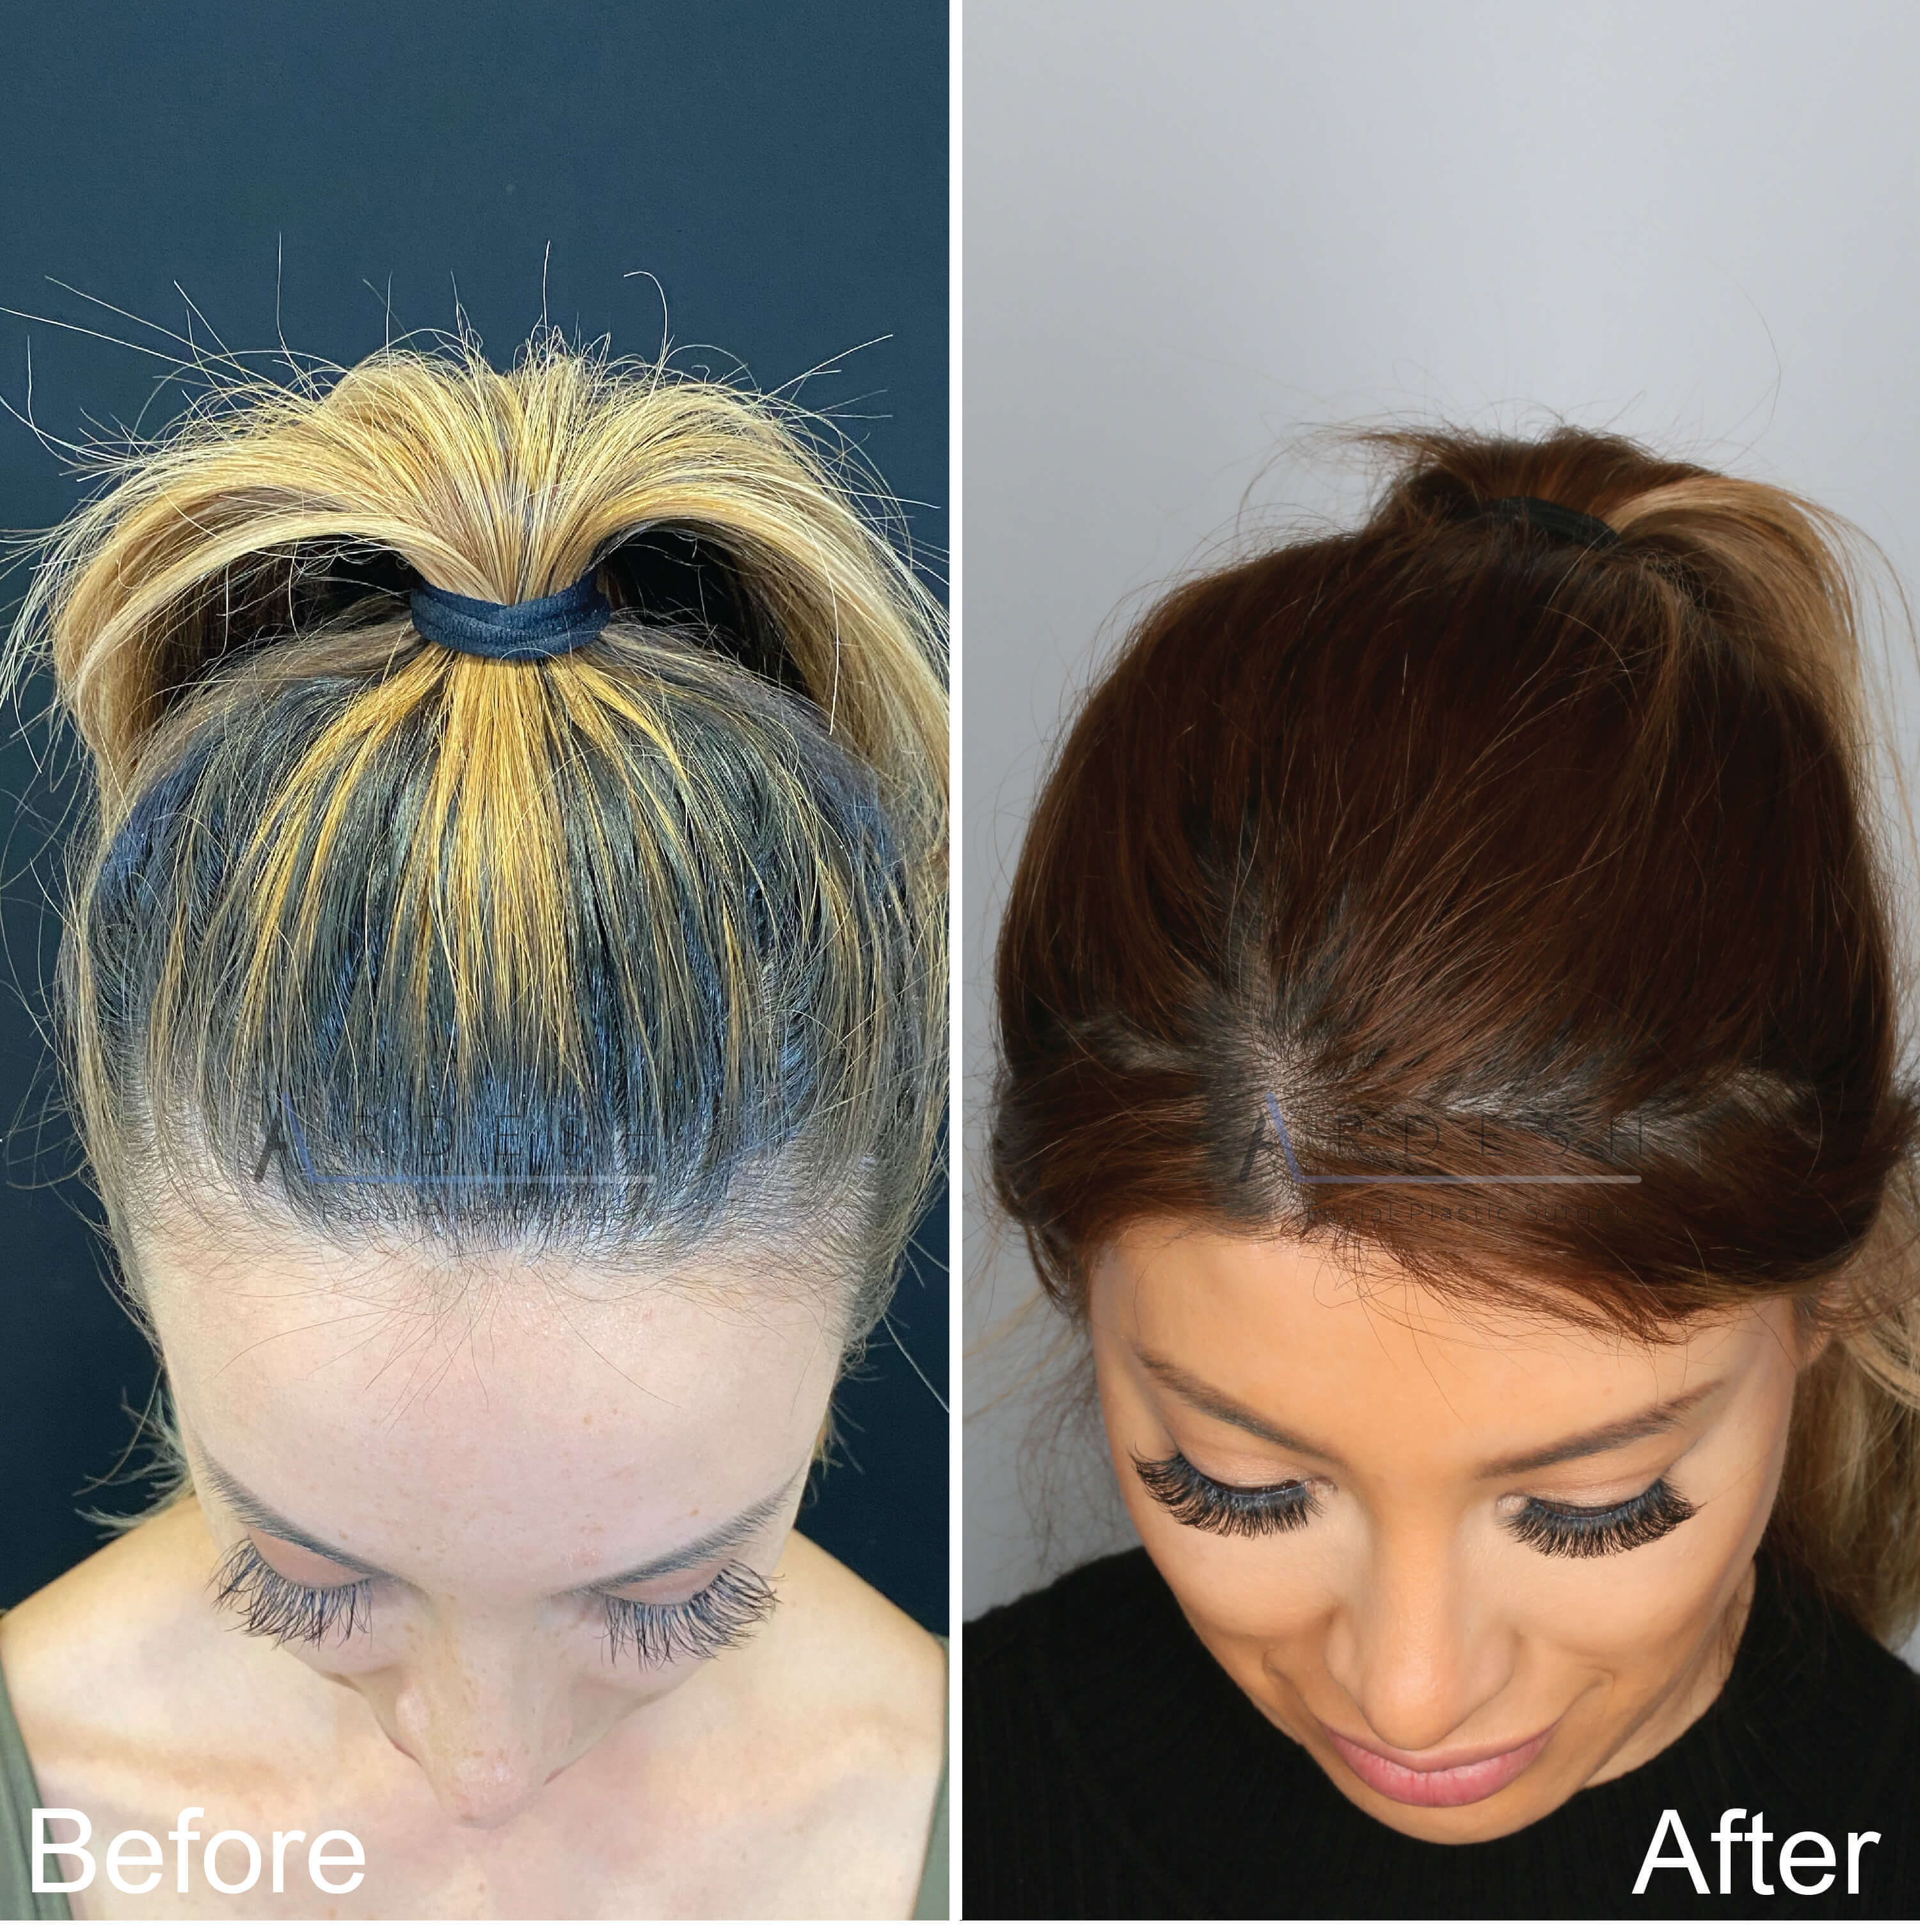 Hair Loss Treatment Before and After | Ardesh Facial Plastic Surgery